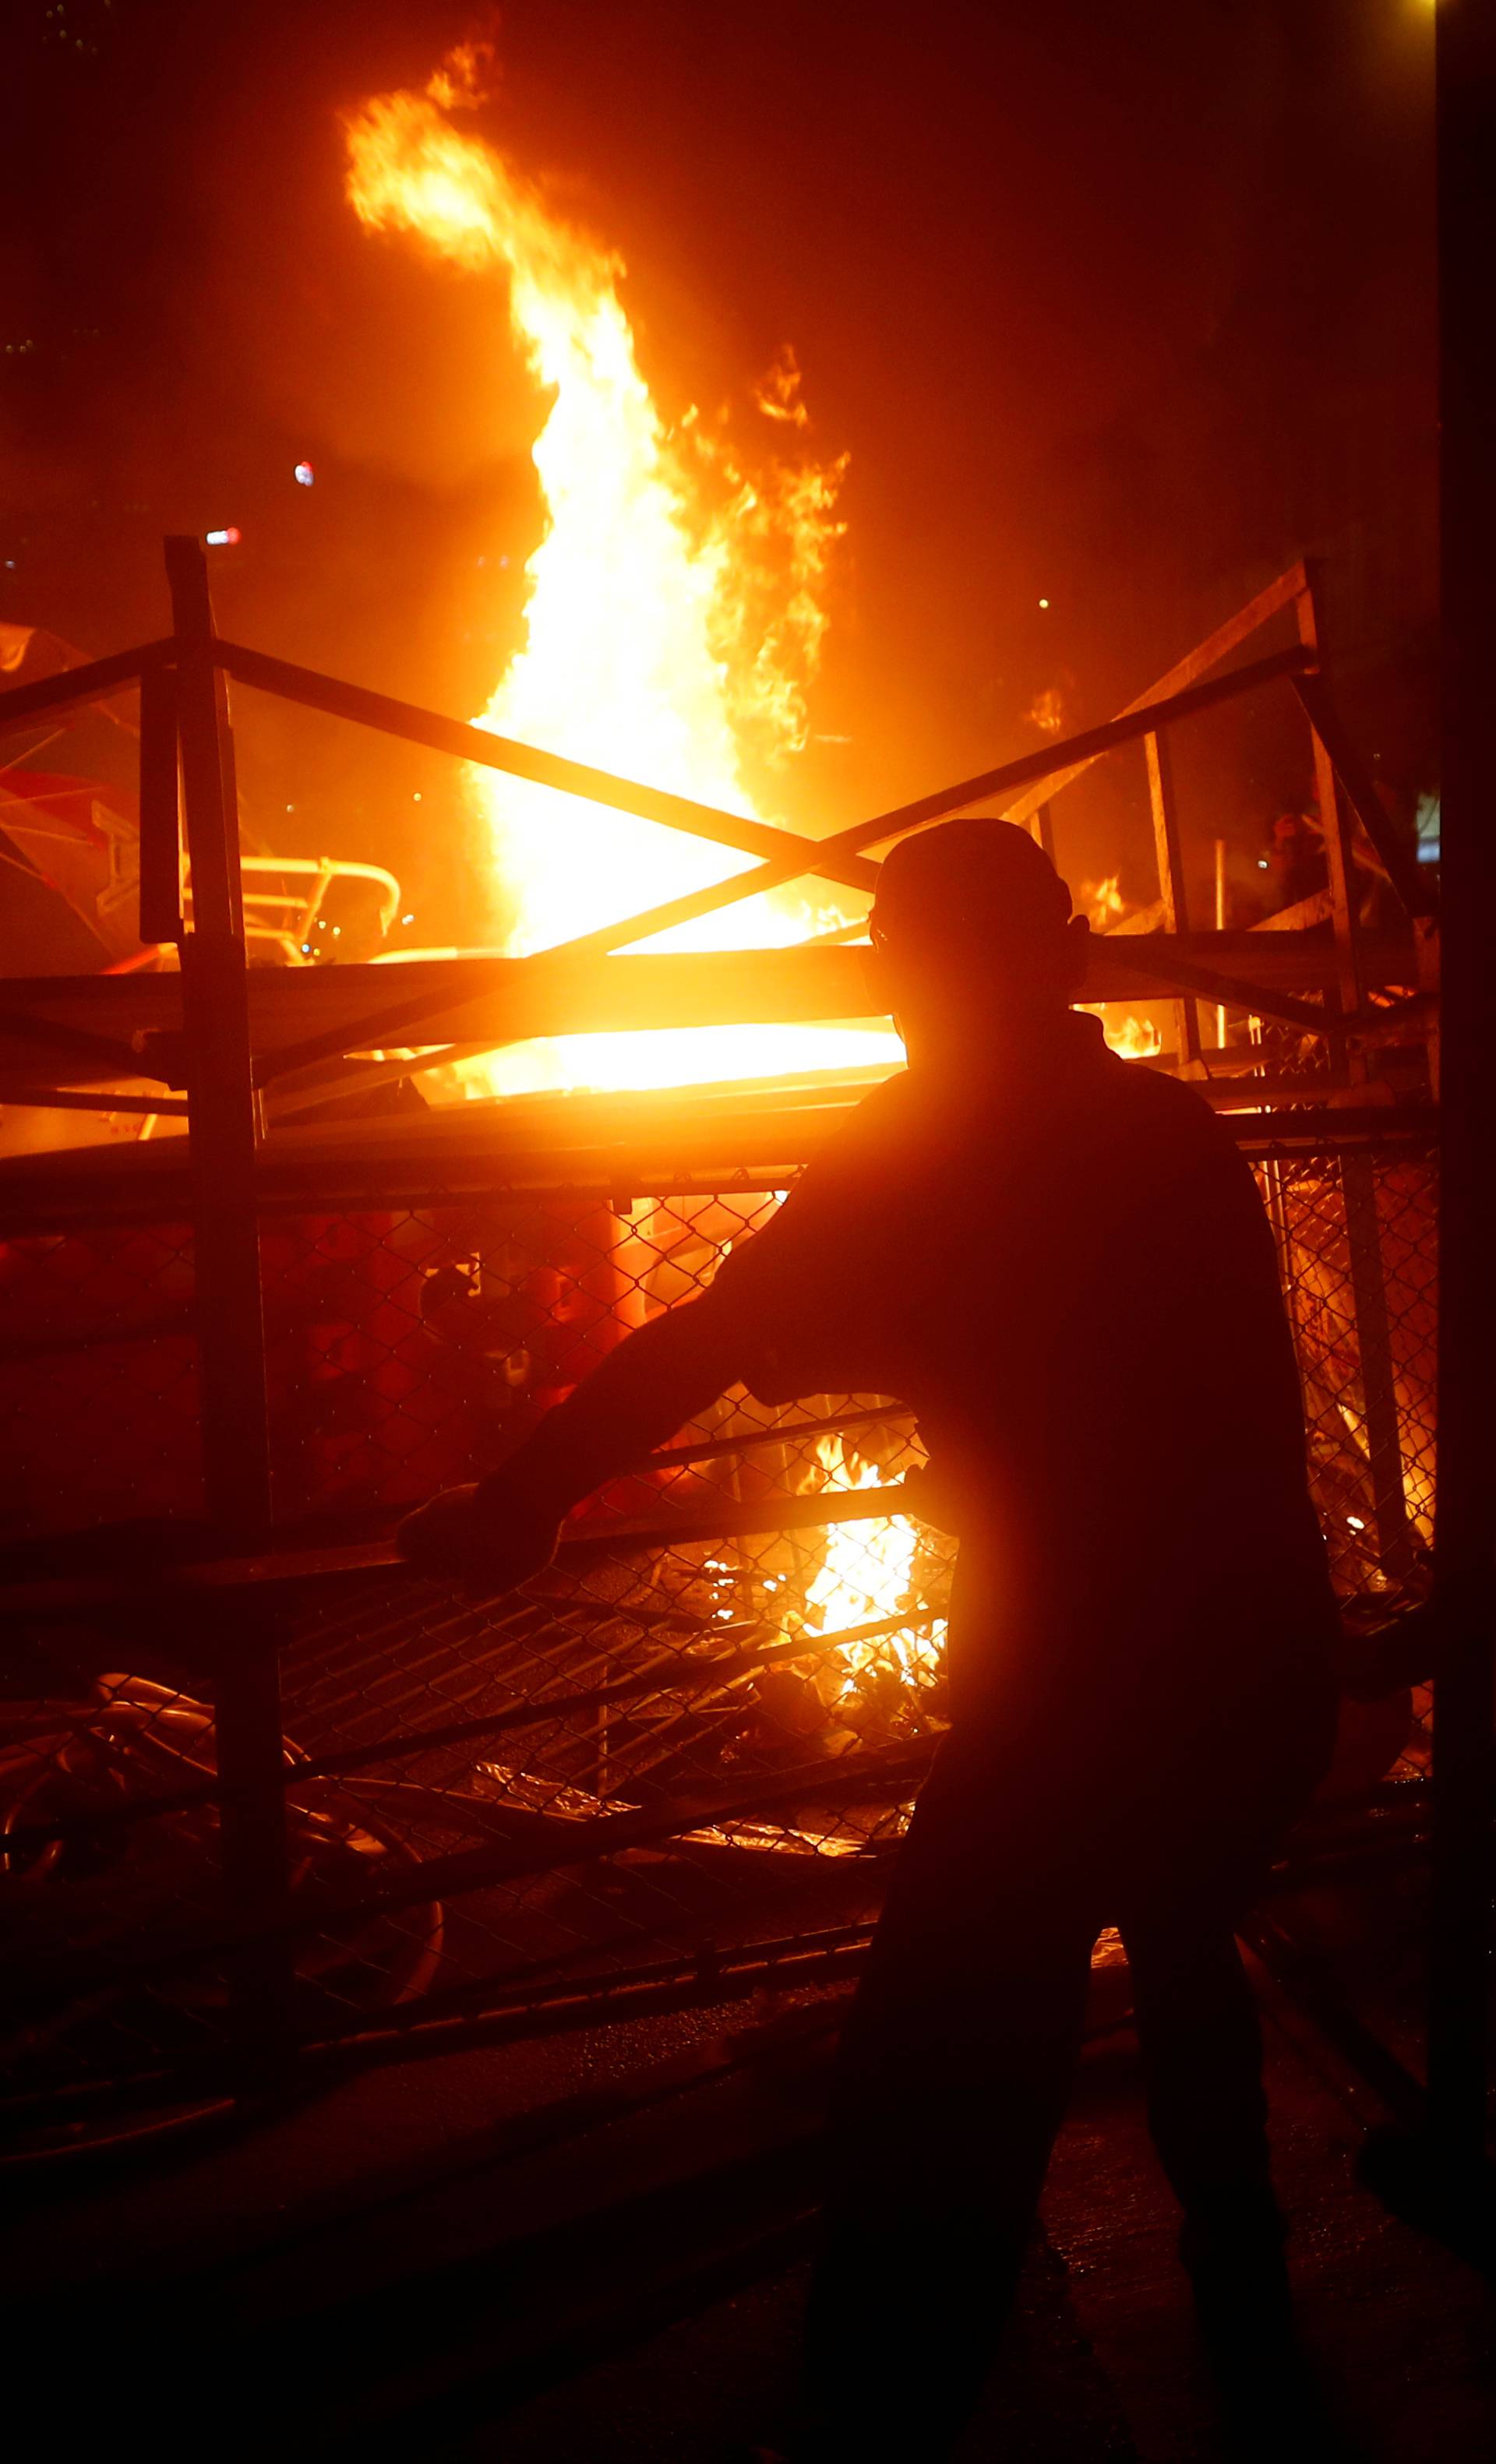 Demonstrators stand next to a burning barricade during a protest in Hong Kong